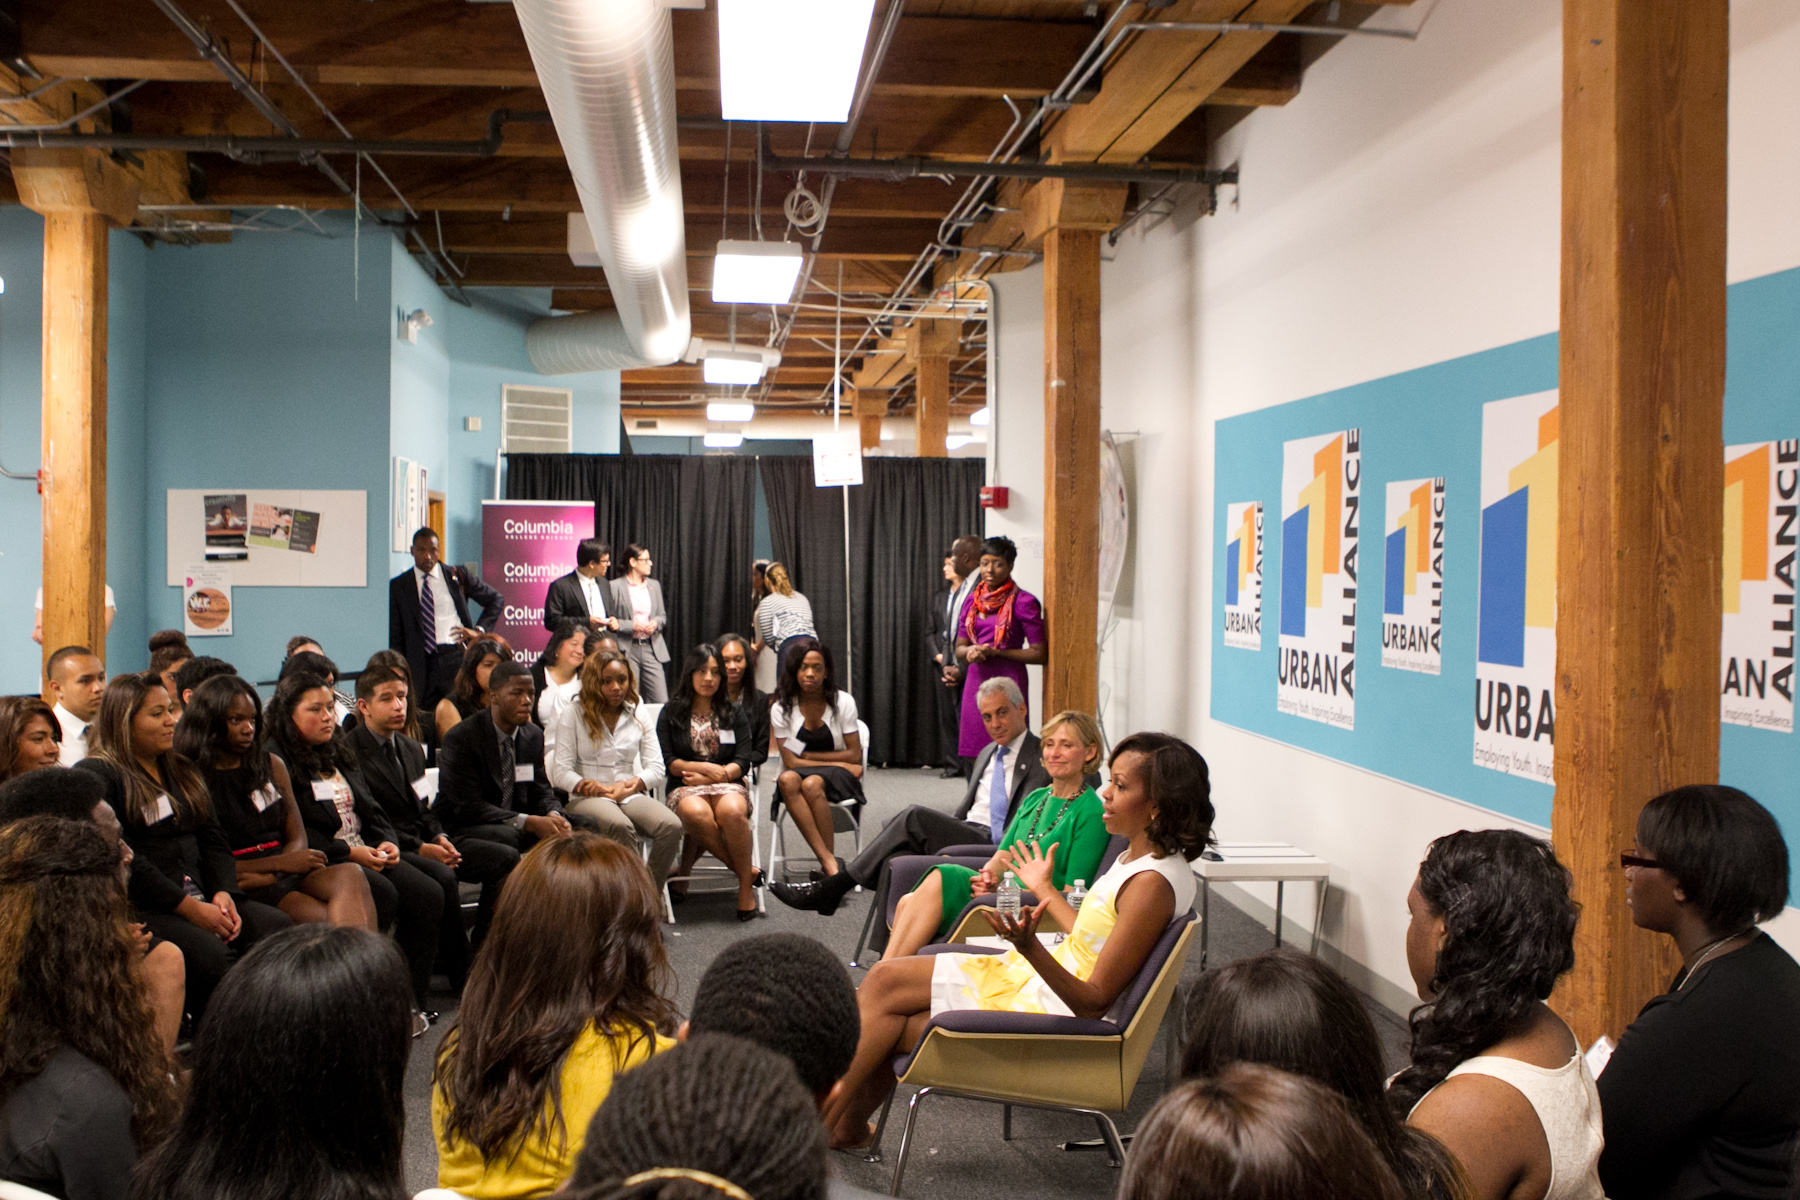 Mayor Emanuel, First Lady Rule and First Lady Obama meet with youth from Urban Alliance Chicago